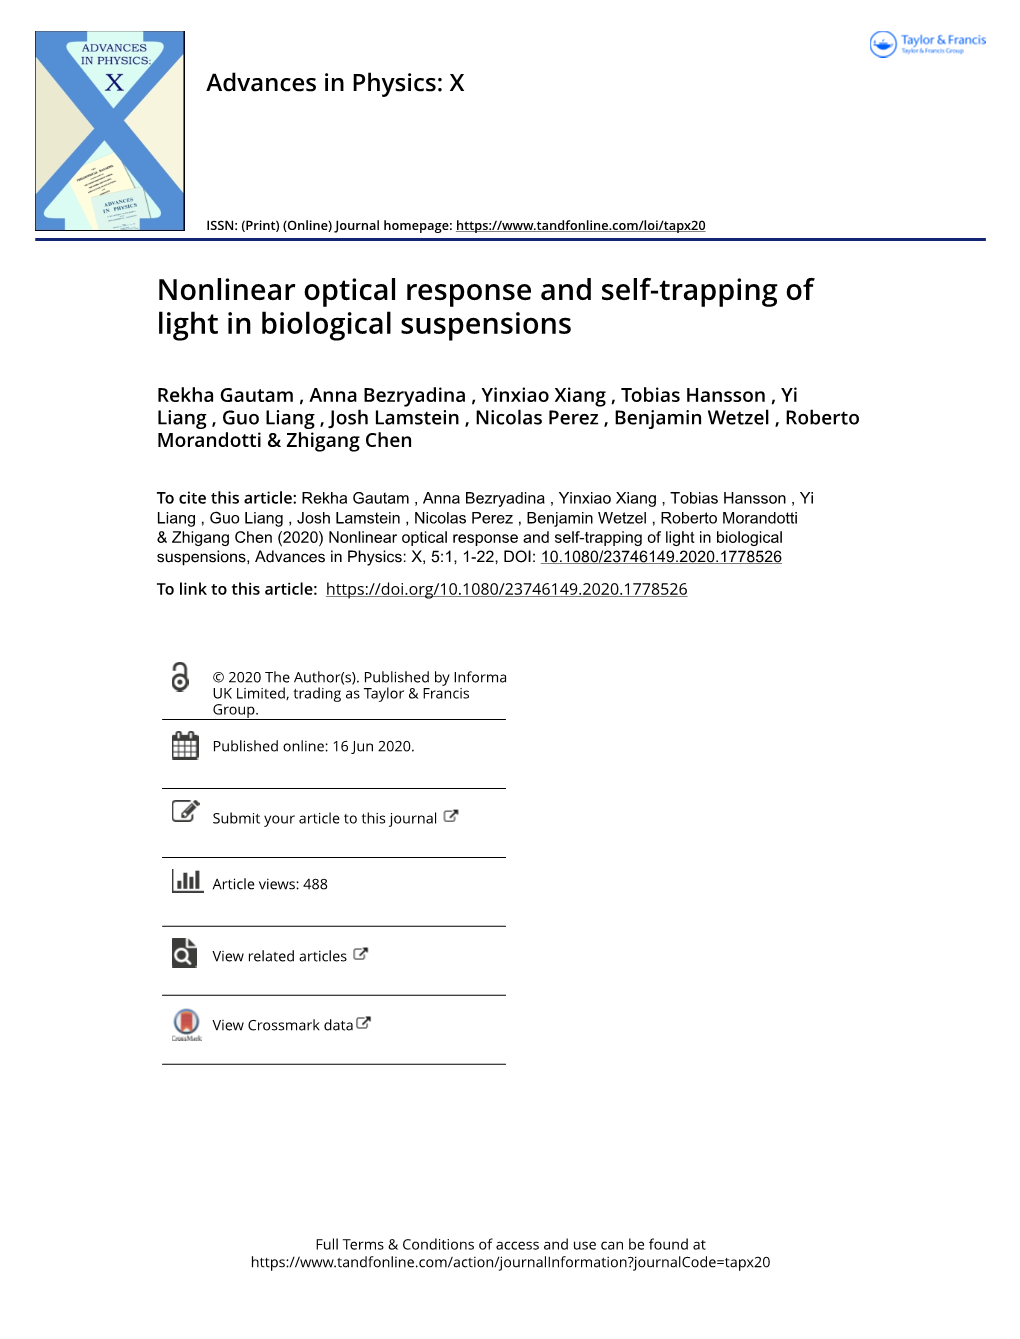 Nonlinear Optical Response and Self-Trapping of Light in Biological Suspensions